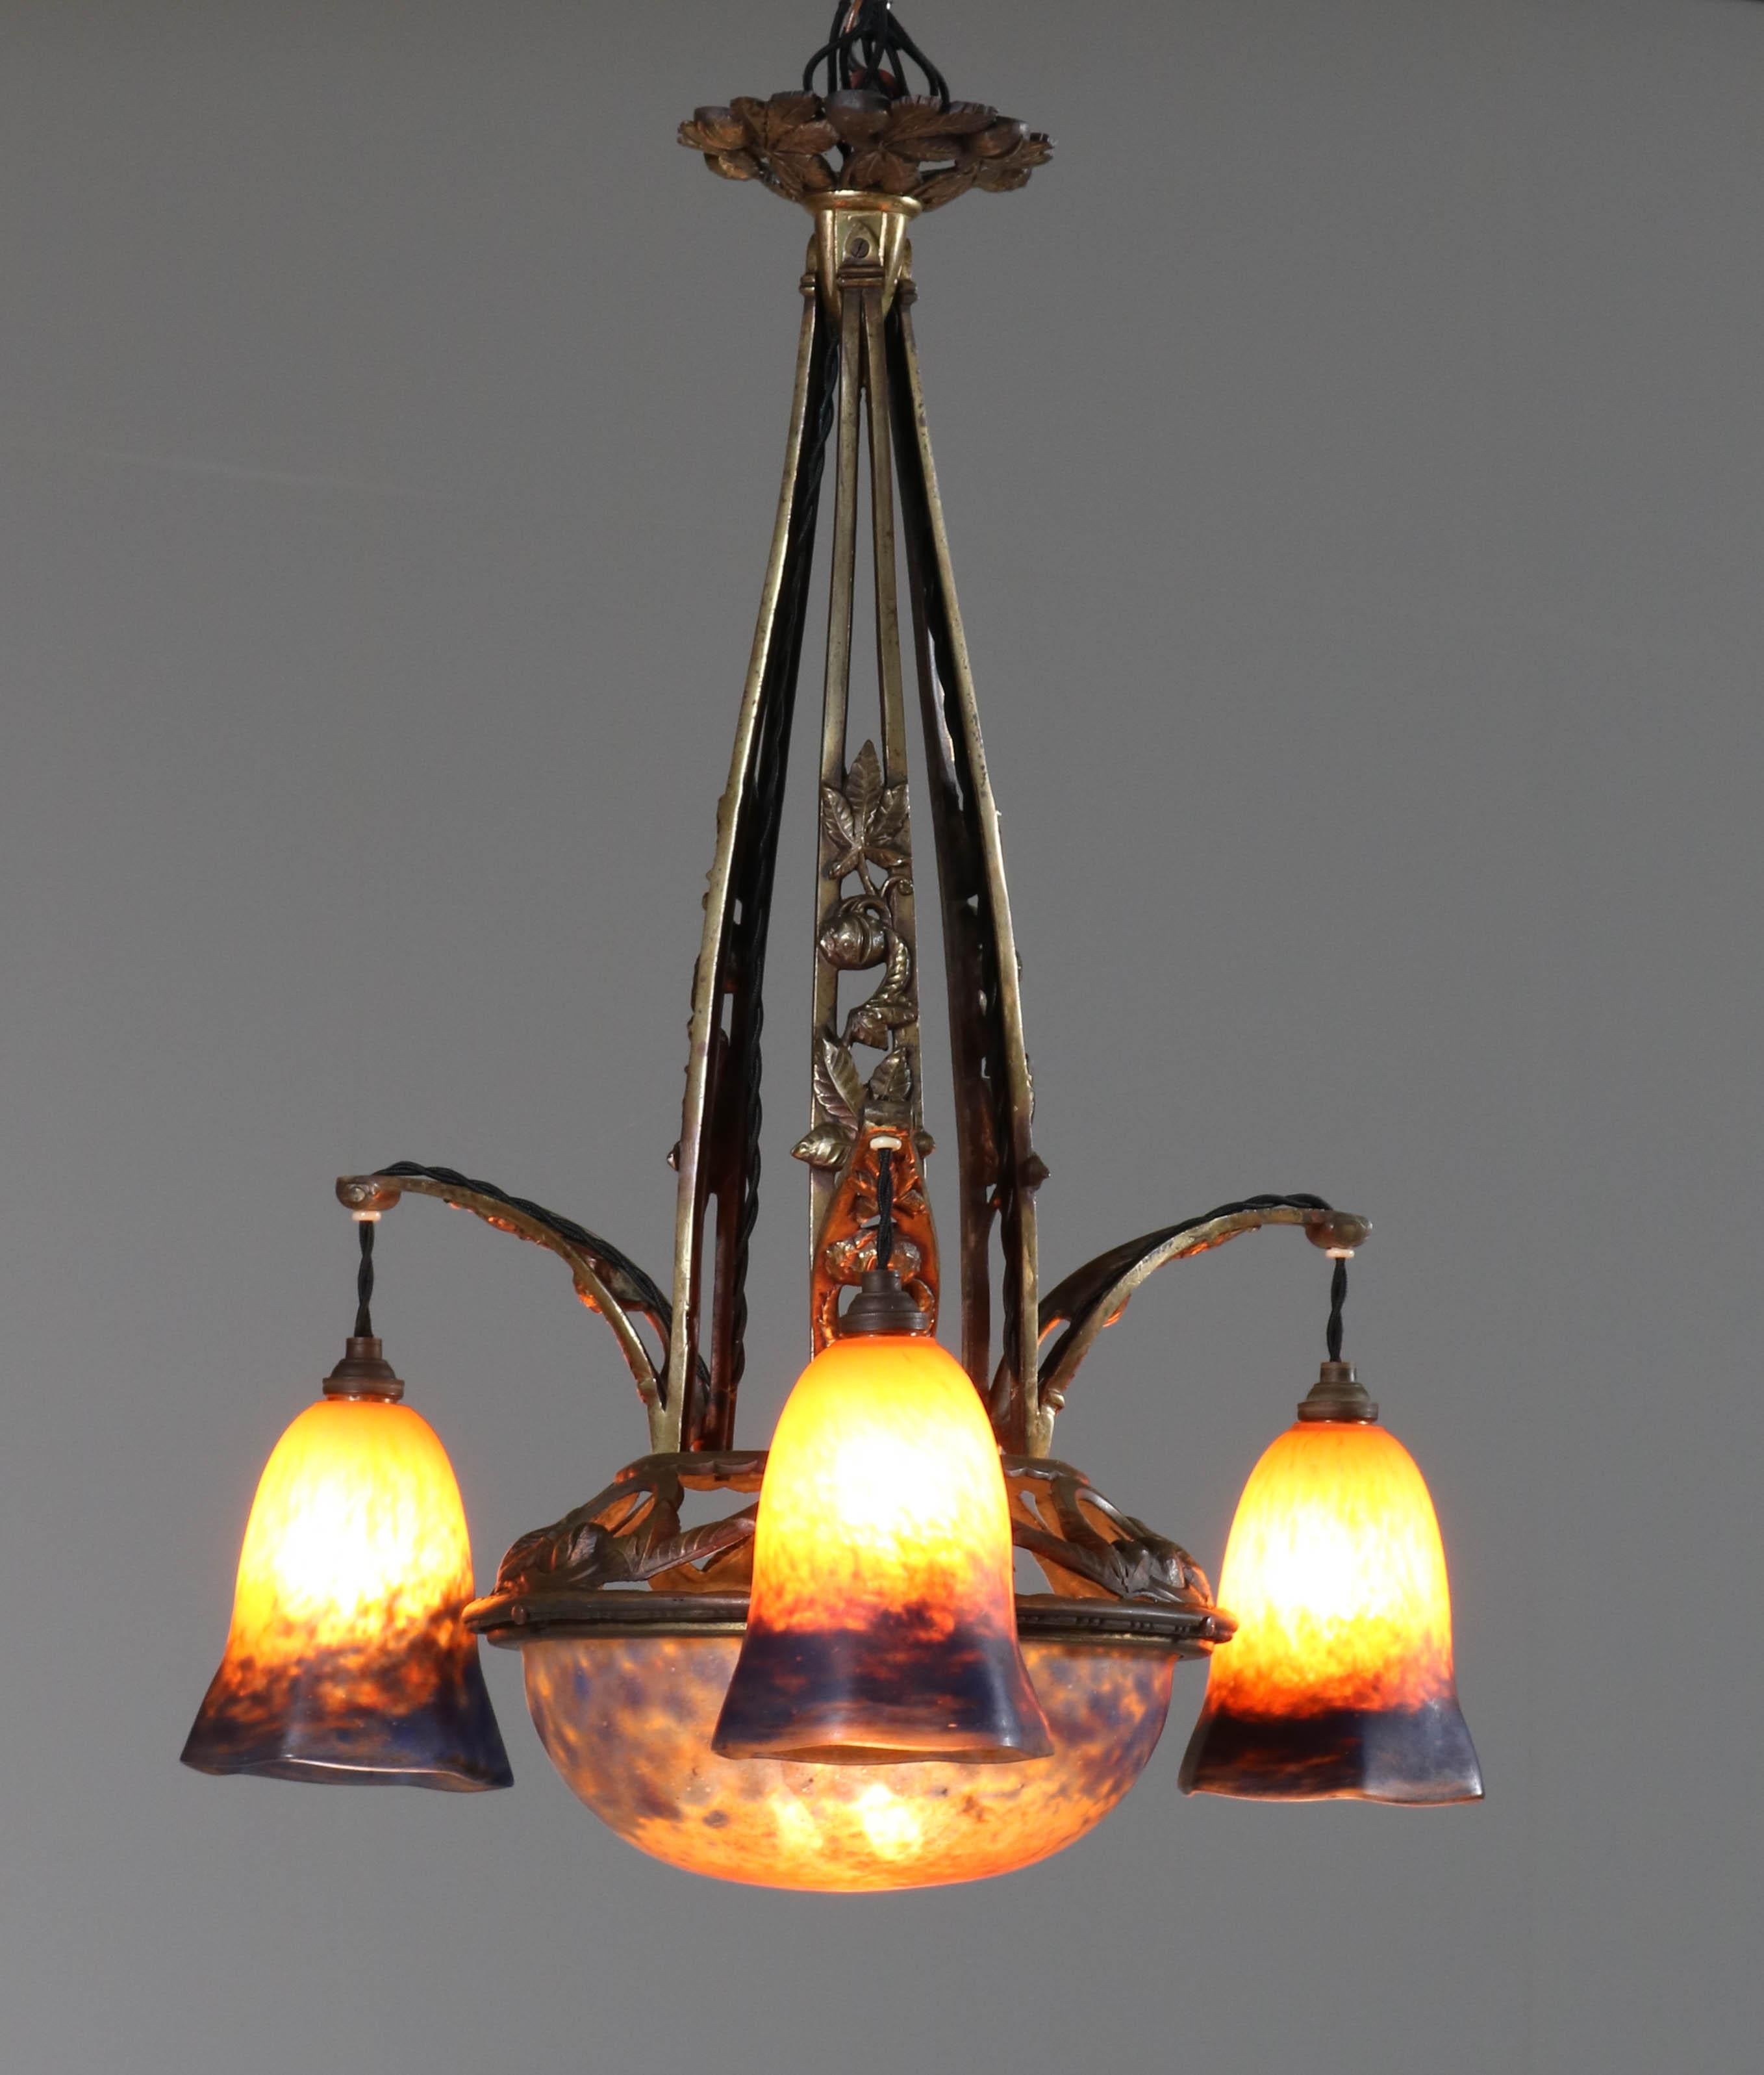 Mid-20th Century Brass French Art Deco Chandelier with Pate de Verre Glass Shades Muller Style